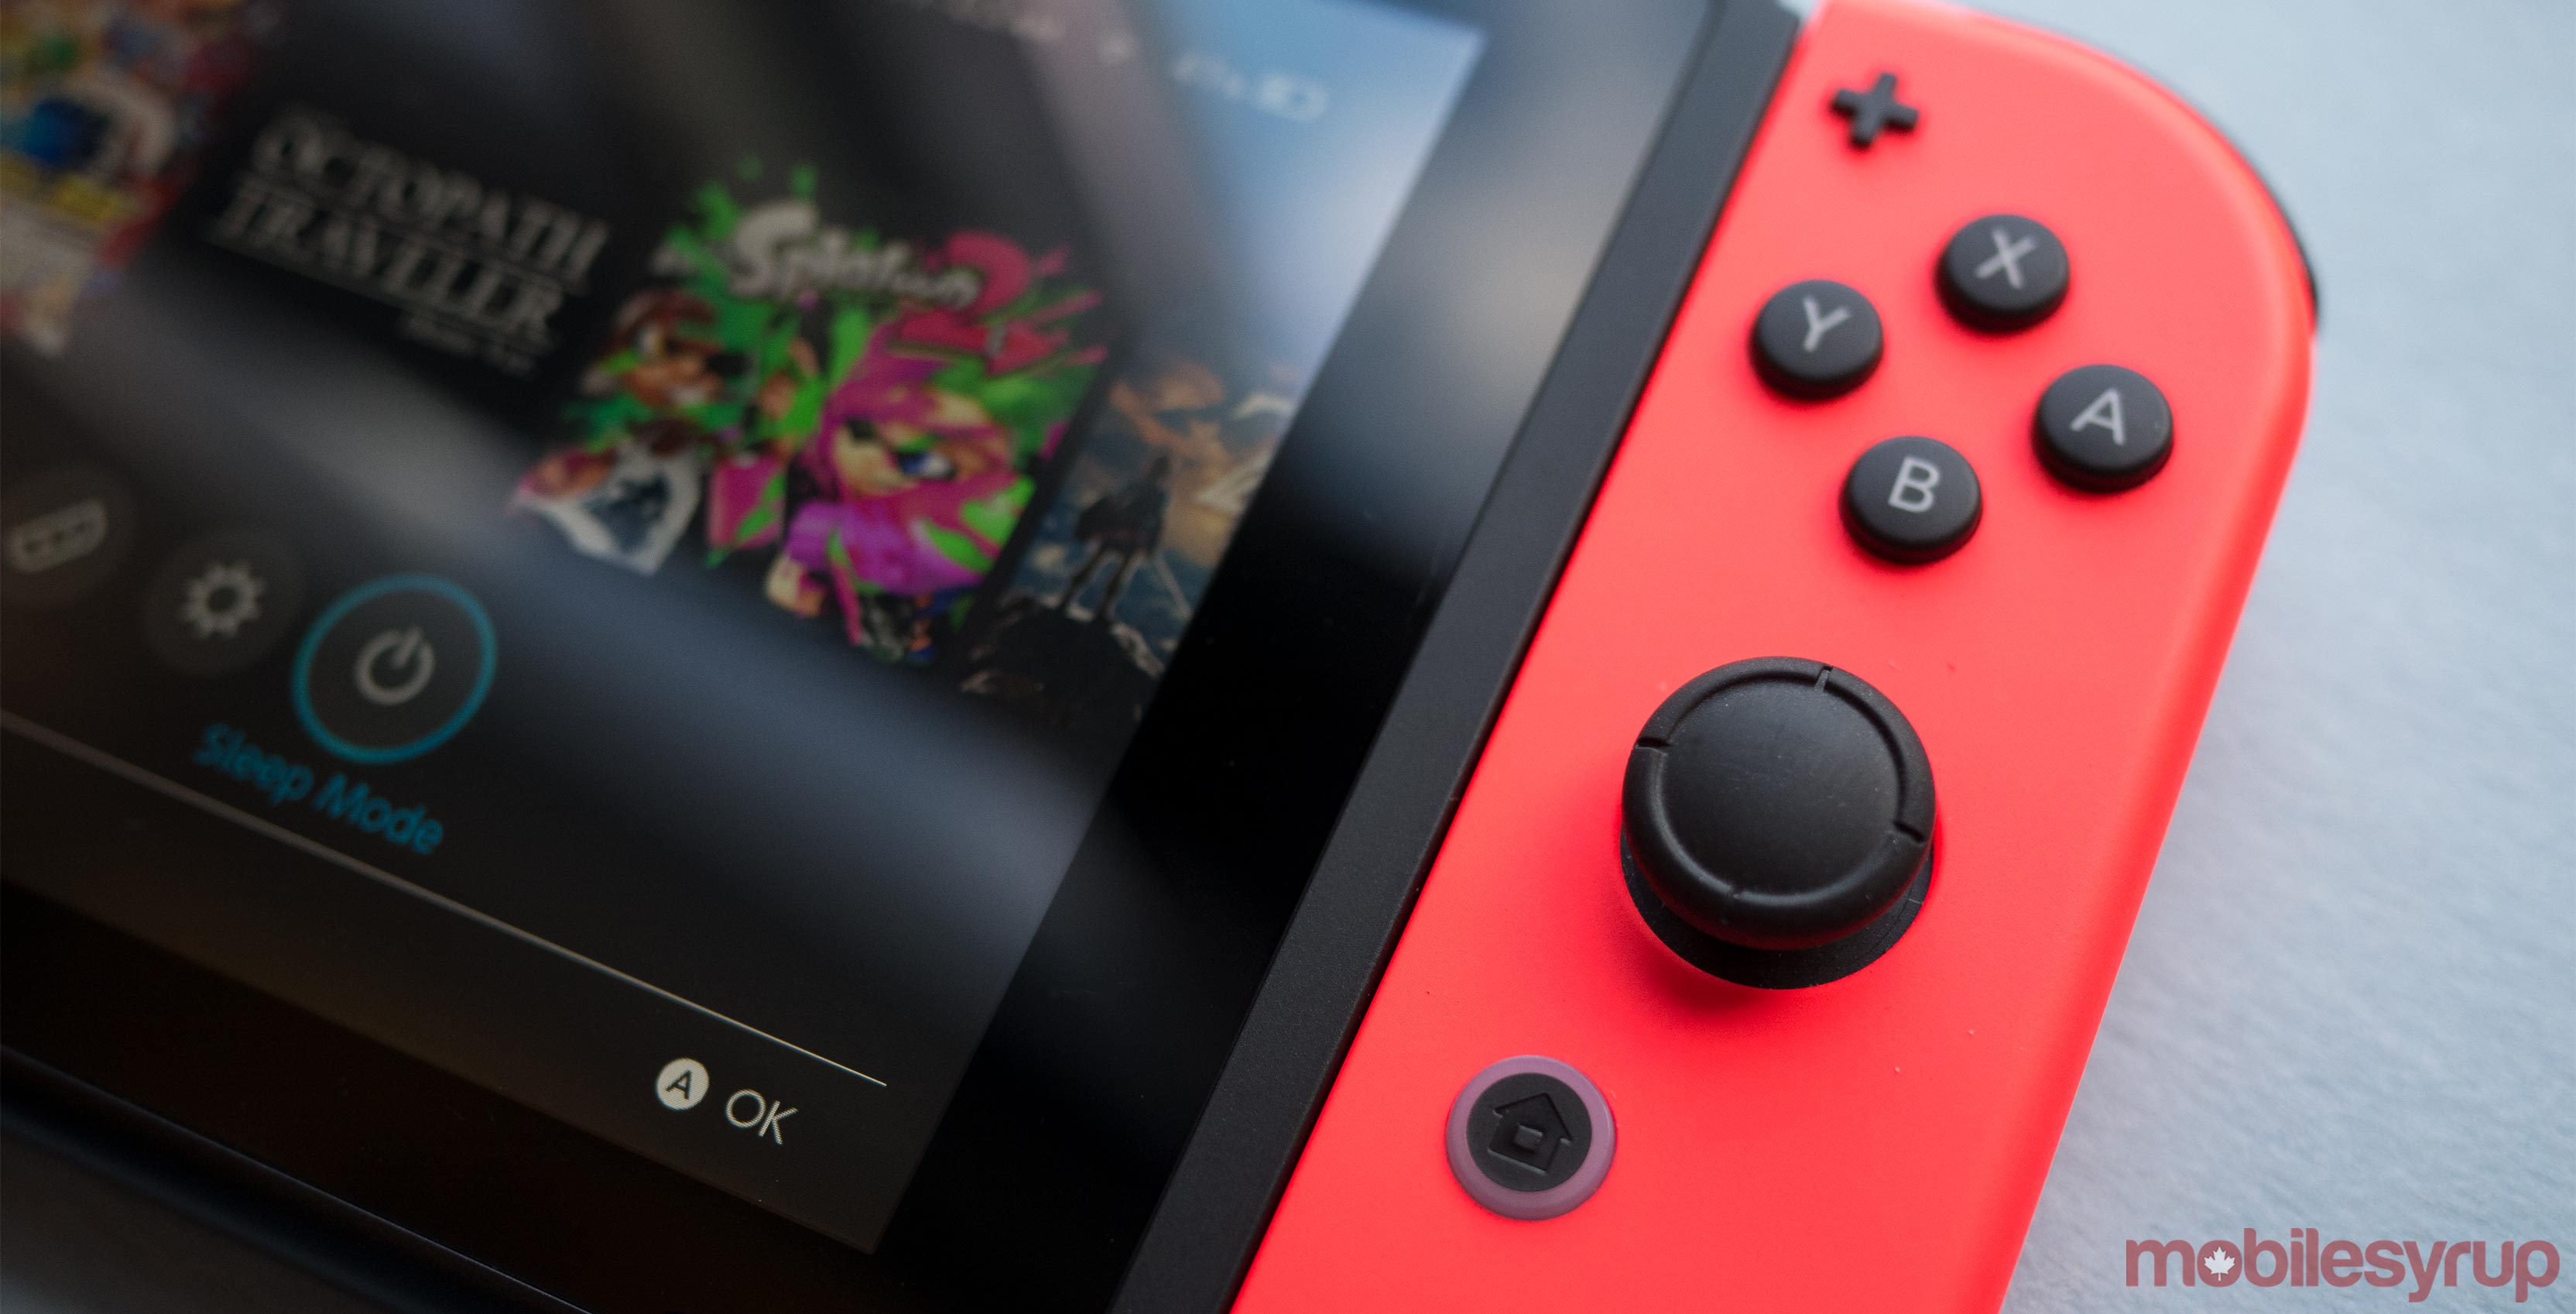 Nintendo Switch with red Joy-Con